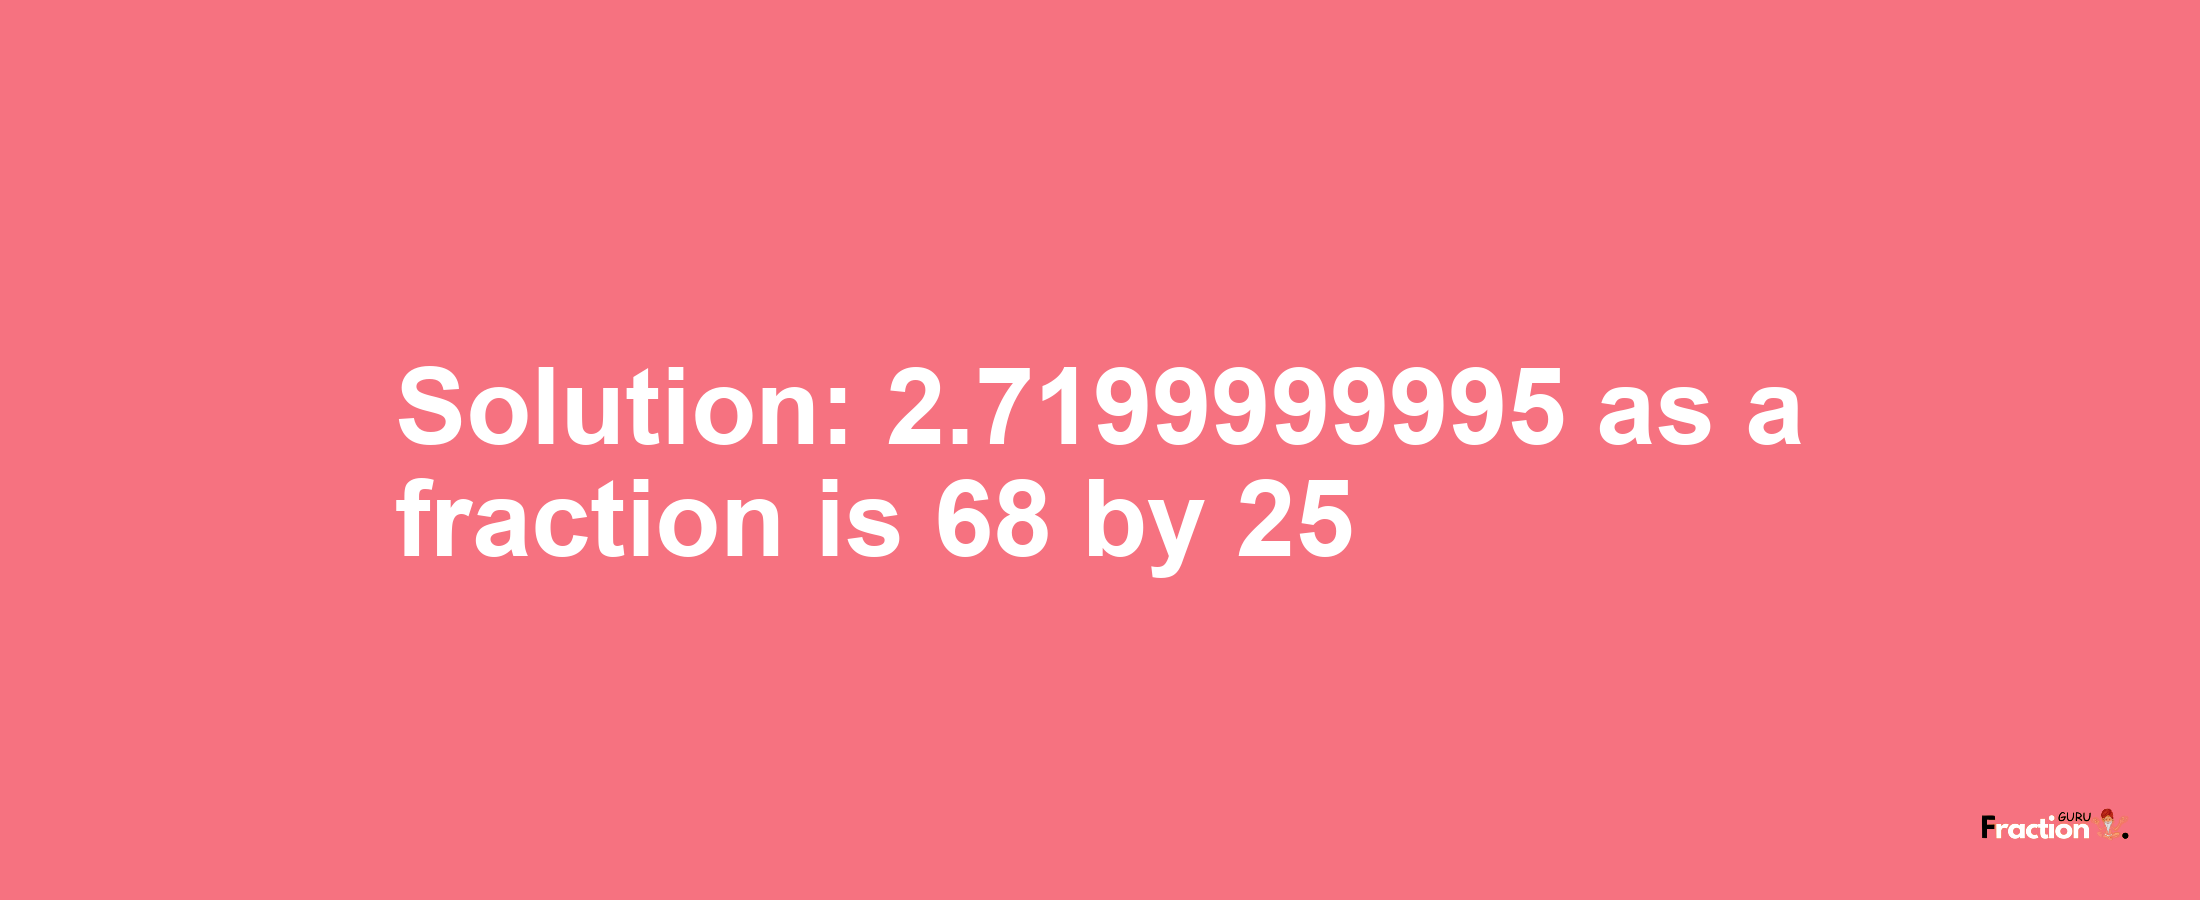 Solution:2.7199999995 as a fraction is 68/25